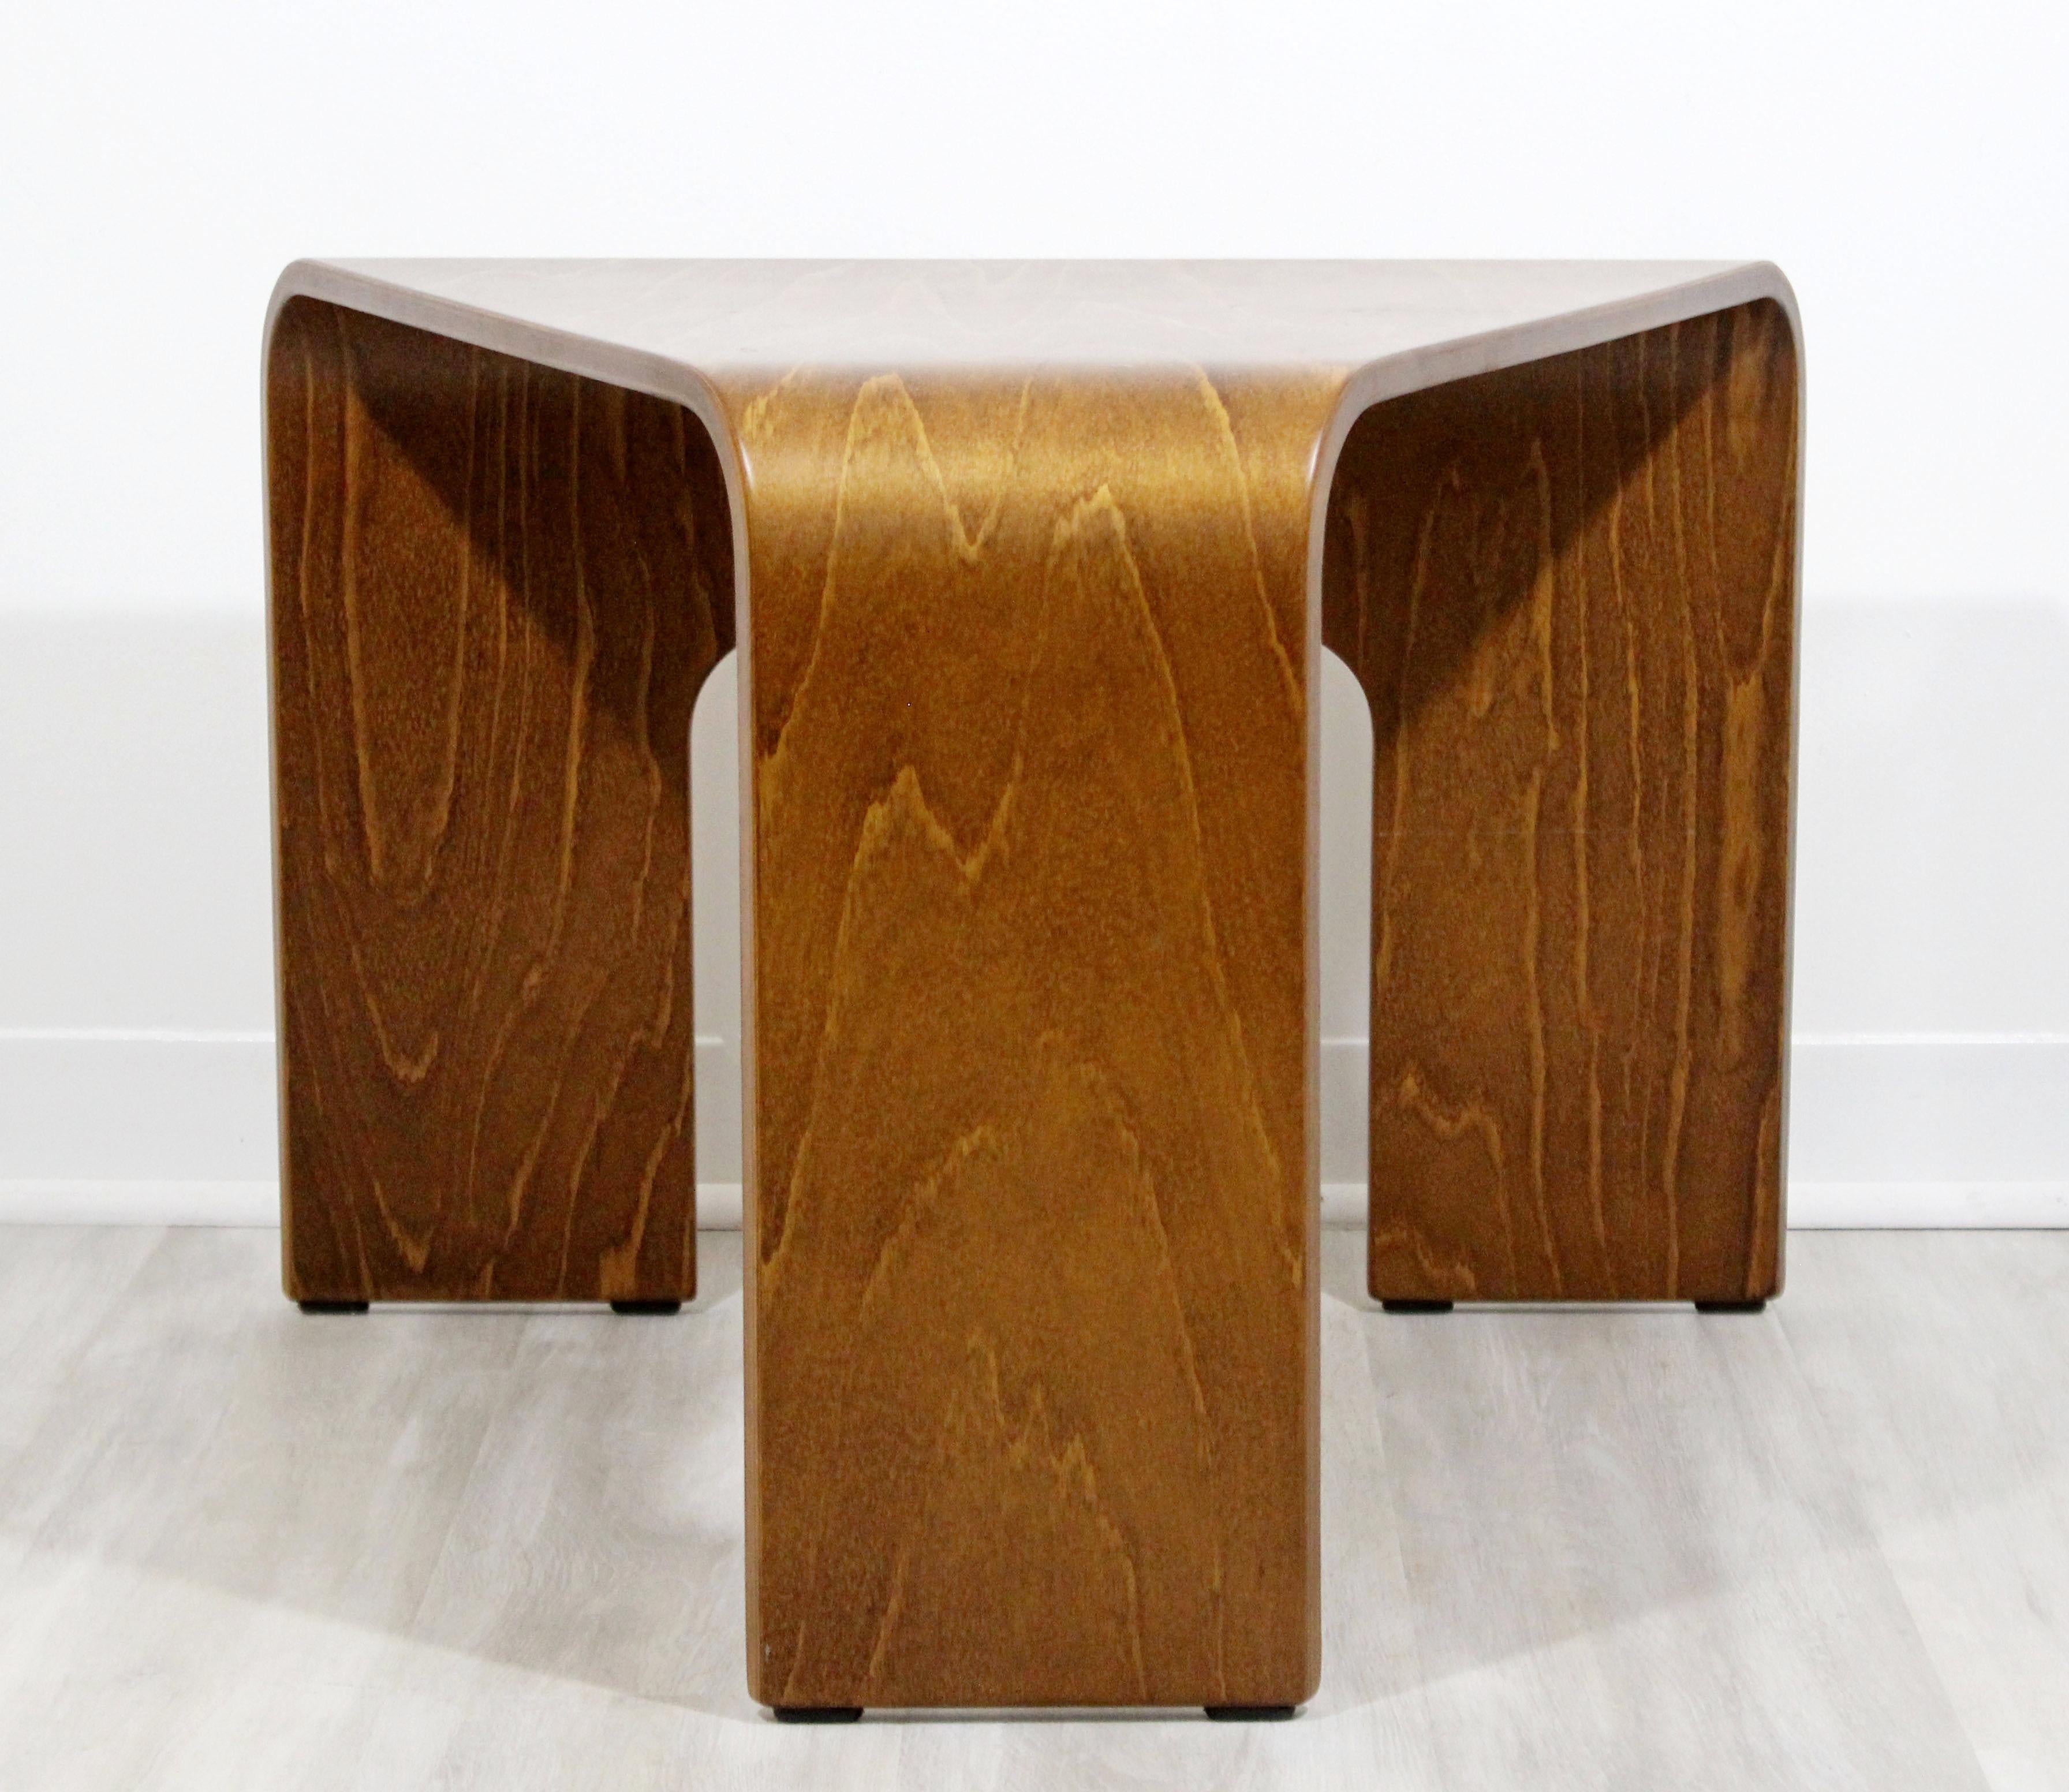 For your consideration is a wonderful corner end table, made of a single piece of bentwood, made in Denmark, circa 1960s. In very good vintage condition. The dimensions are 27